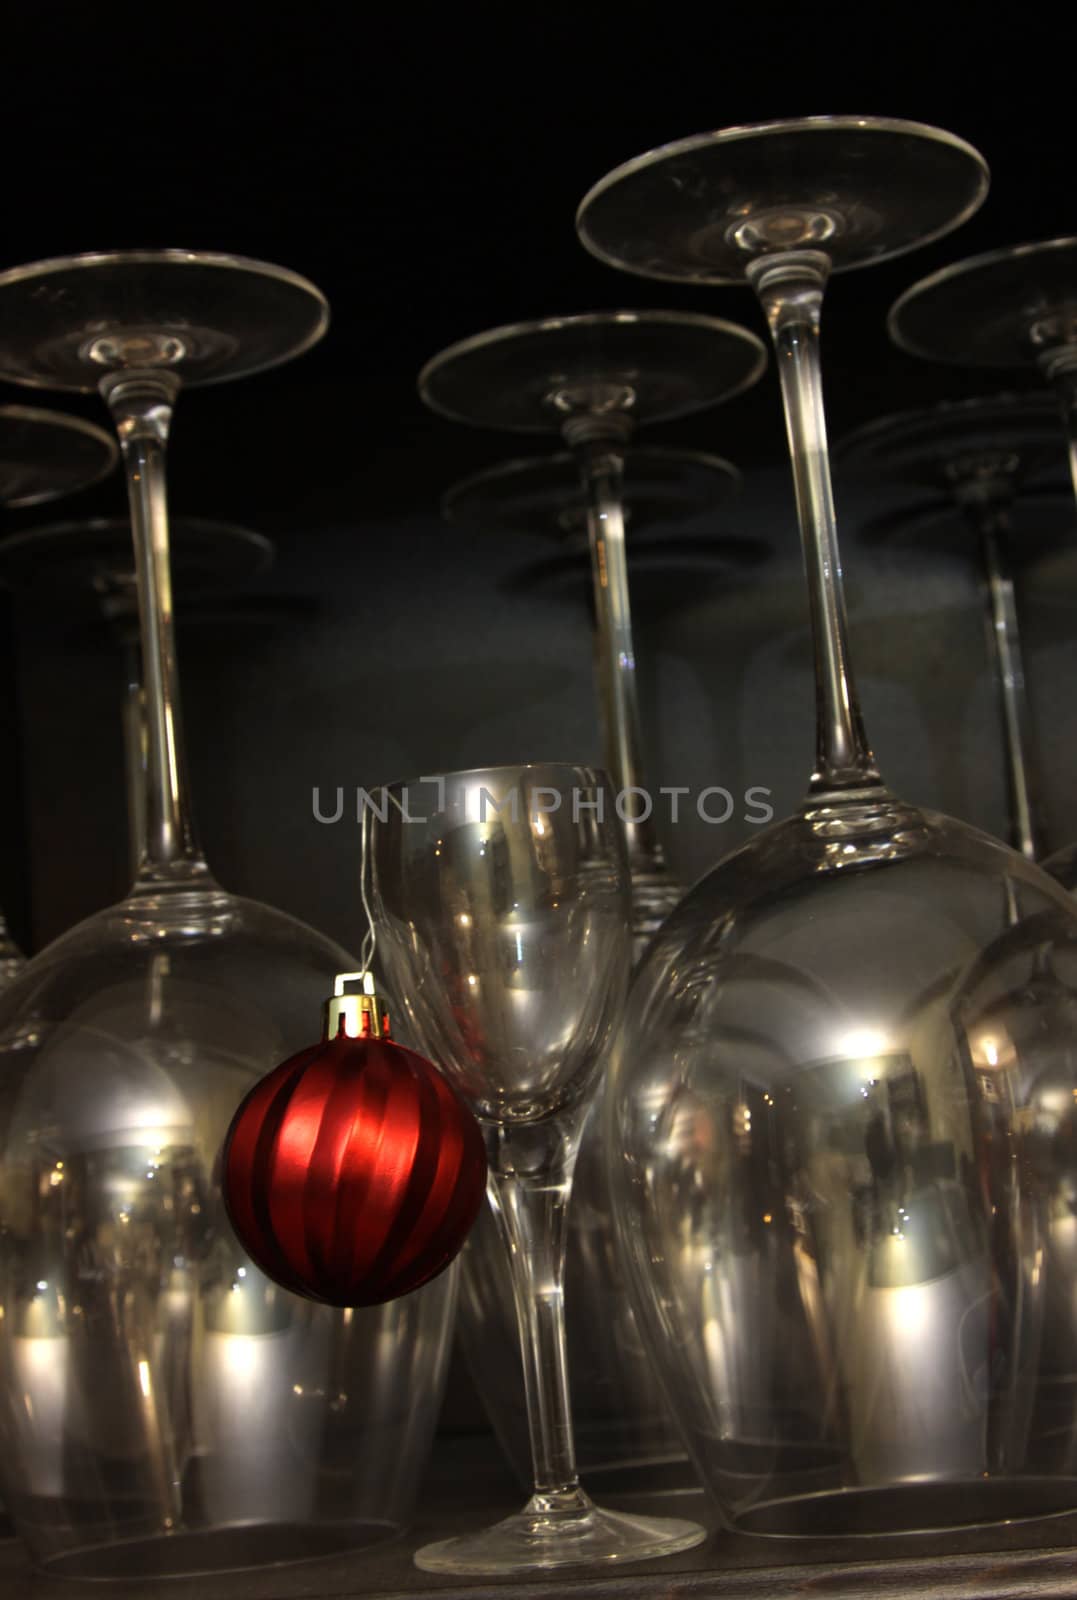 Red Ornament and Glasses
 by ca2hill